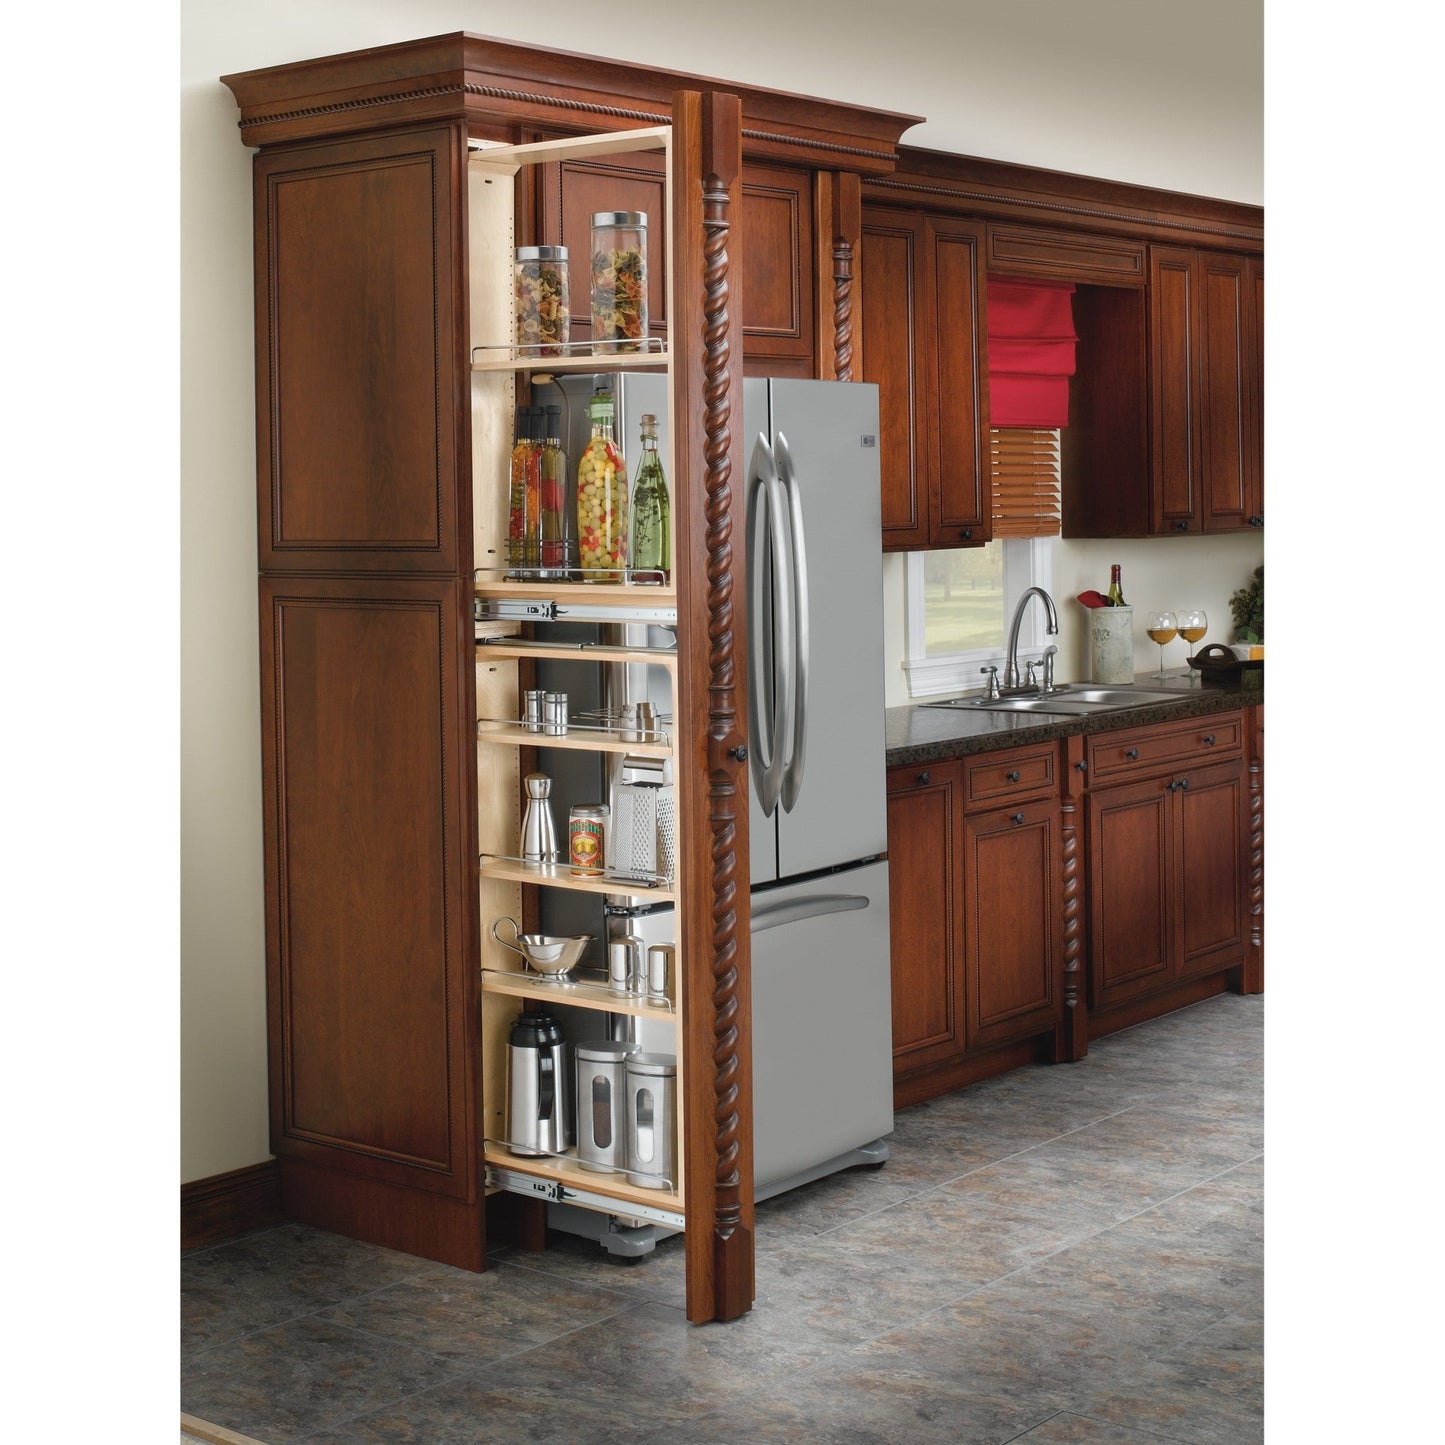 Rev-A-Shelf - Wood Tall Filler Pull Out Organizer for New Kitchen Applications